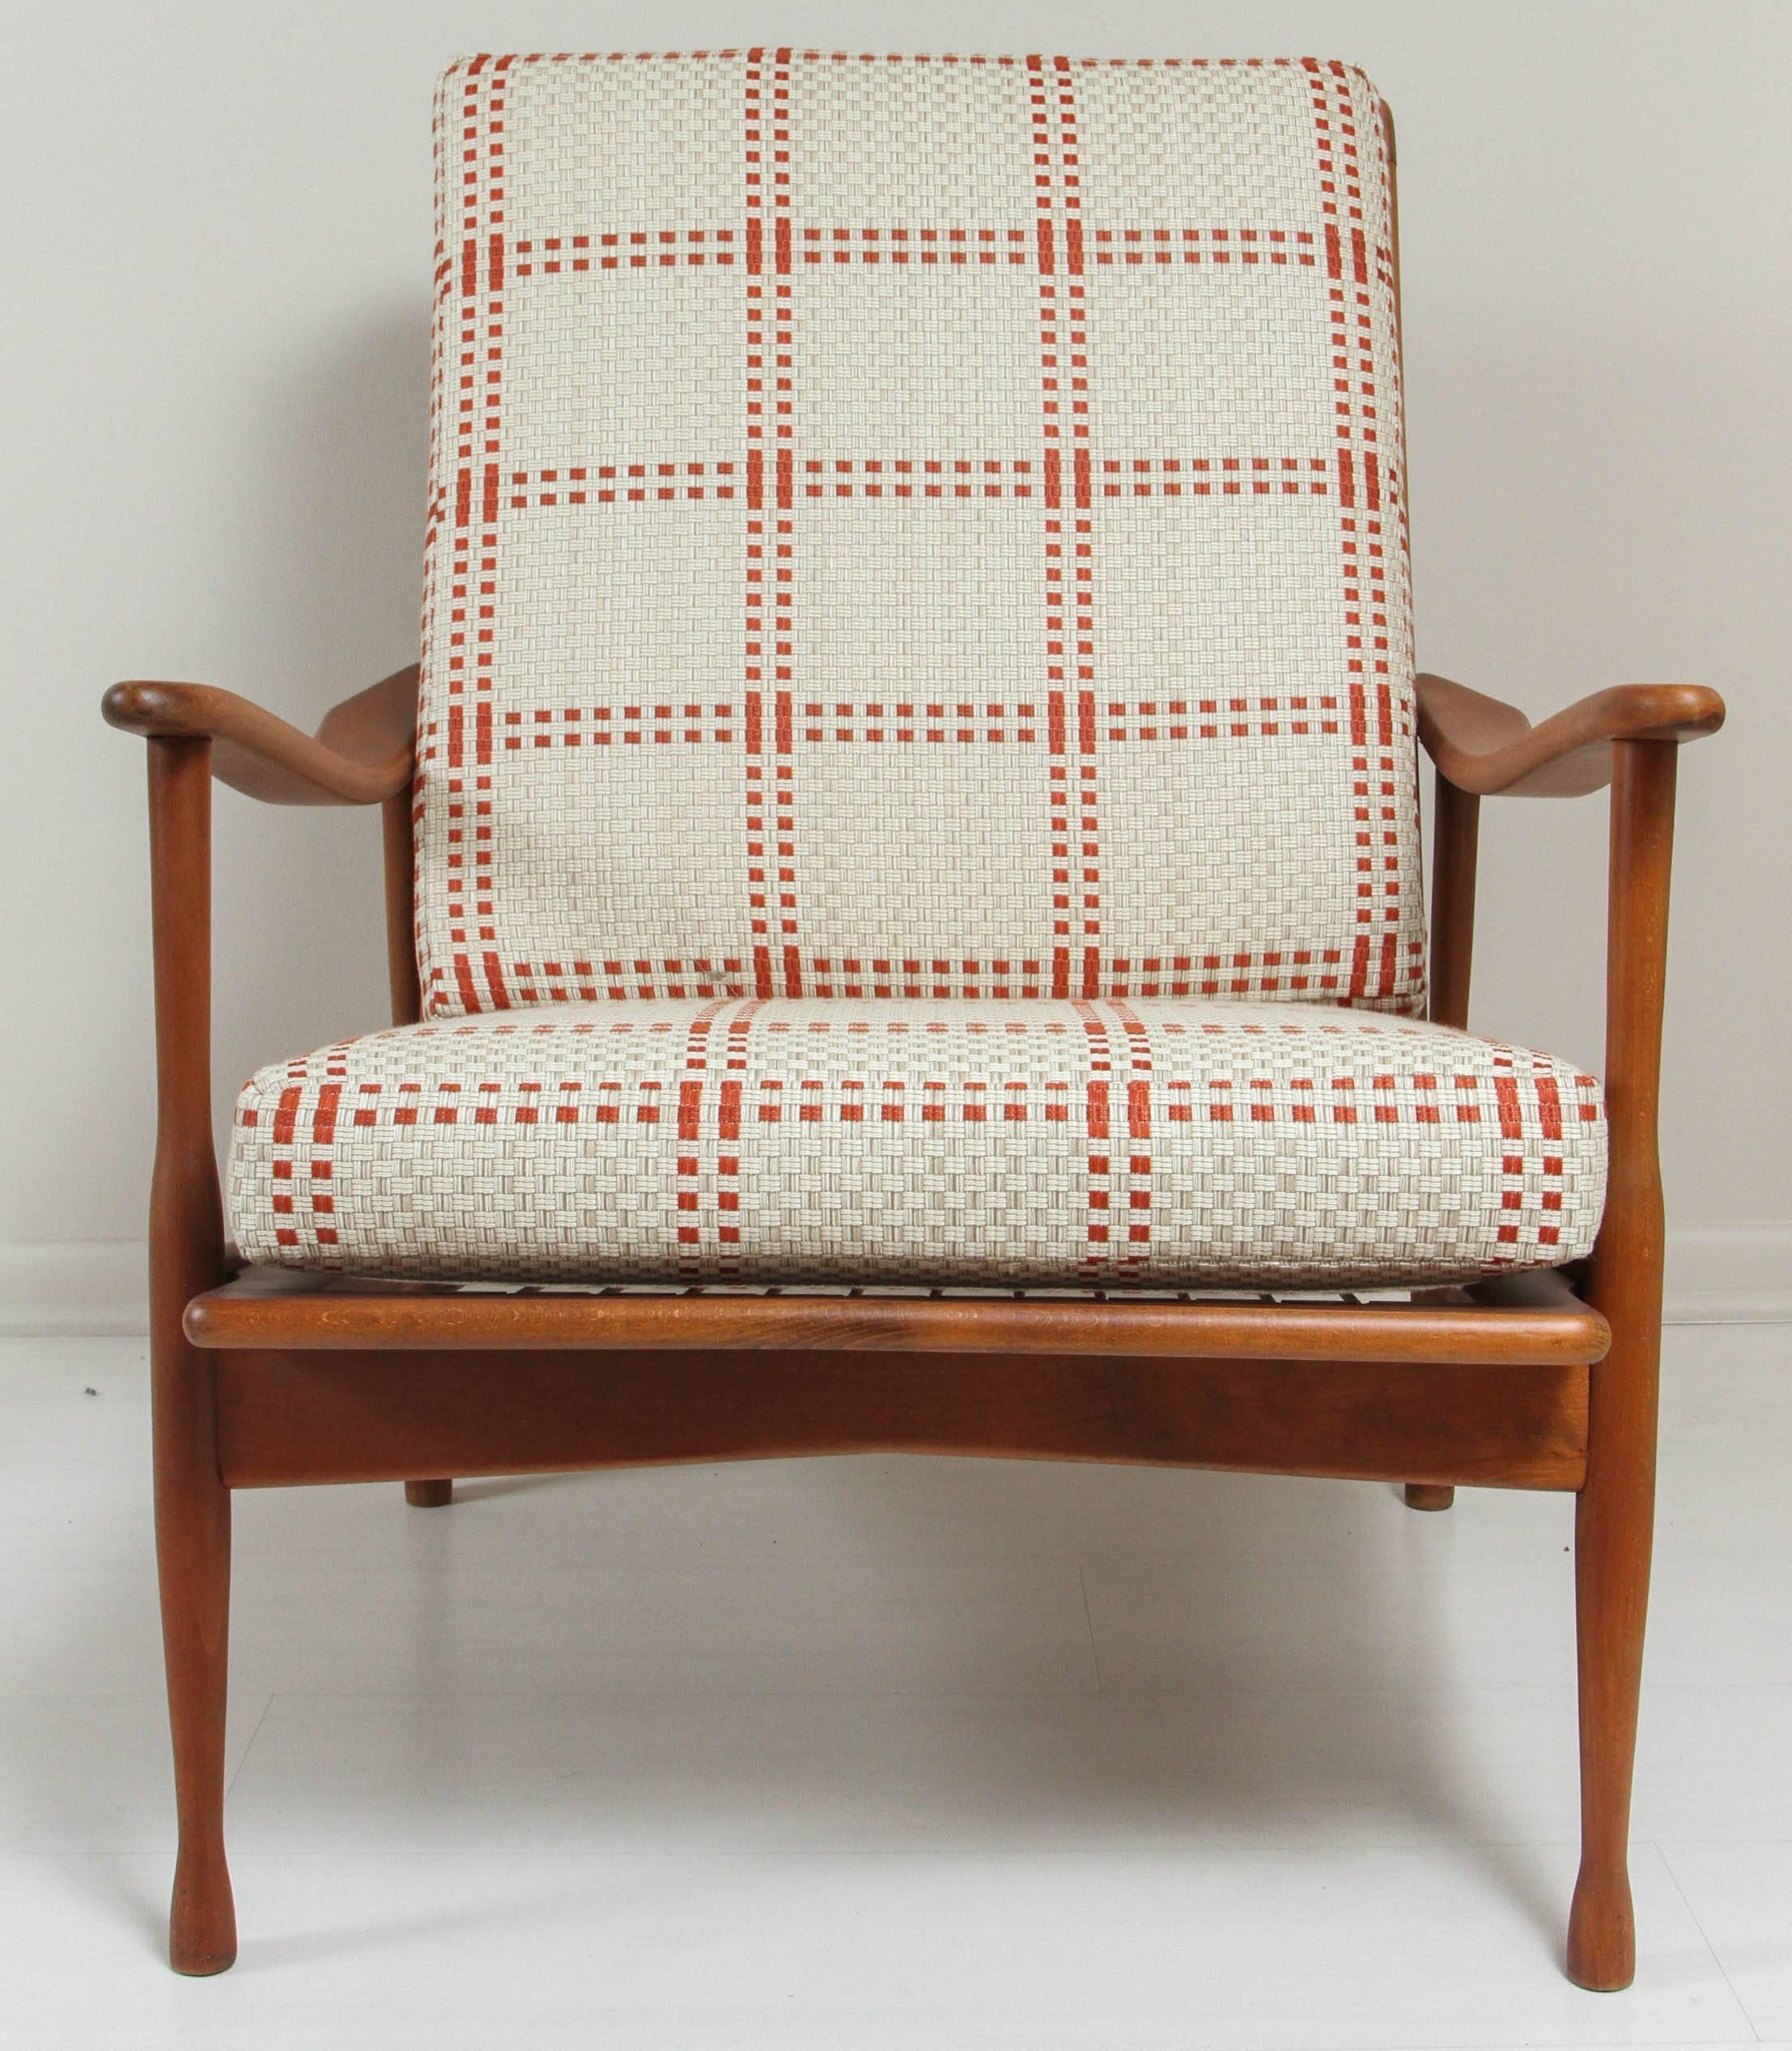 Danish teak occasional chair with newly upholstered cushions. Seat height: 16